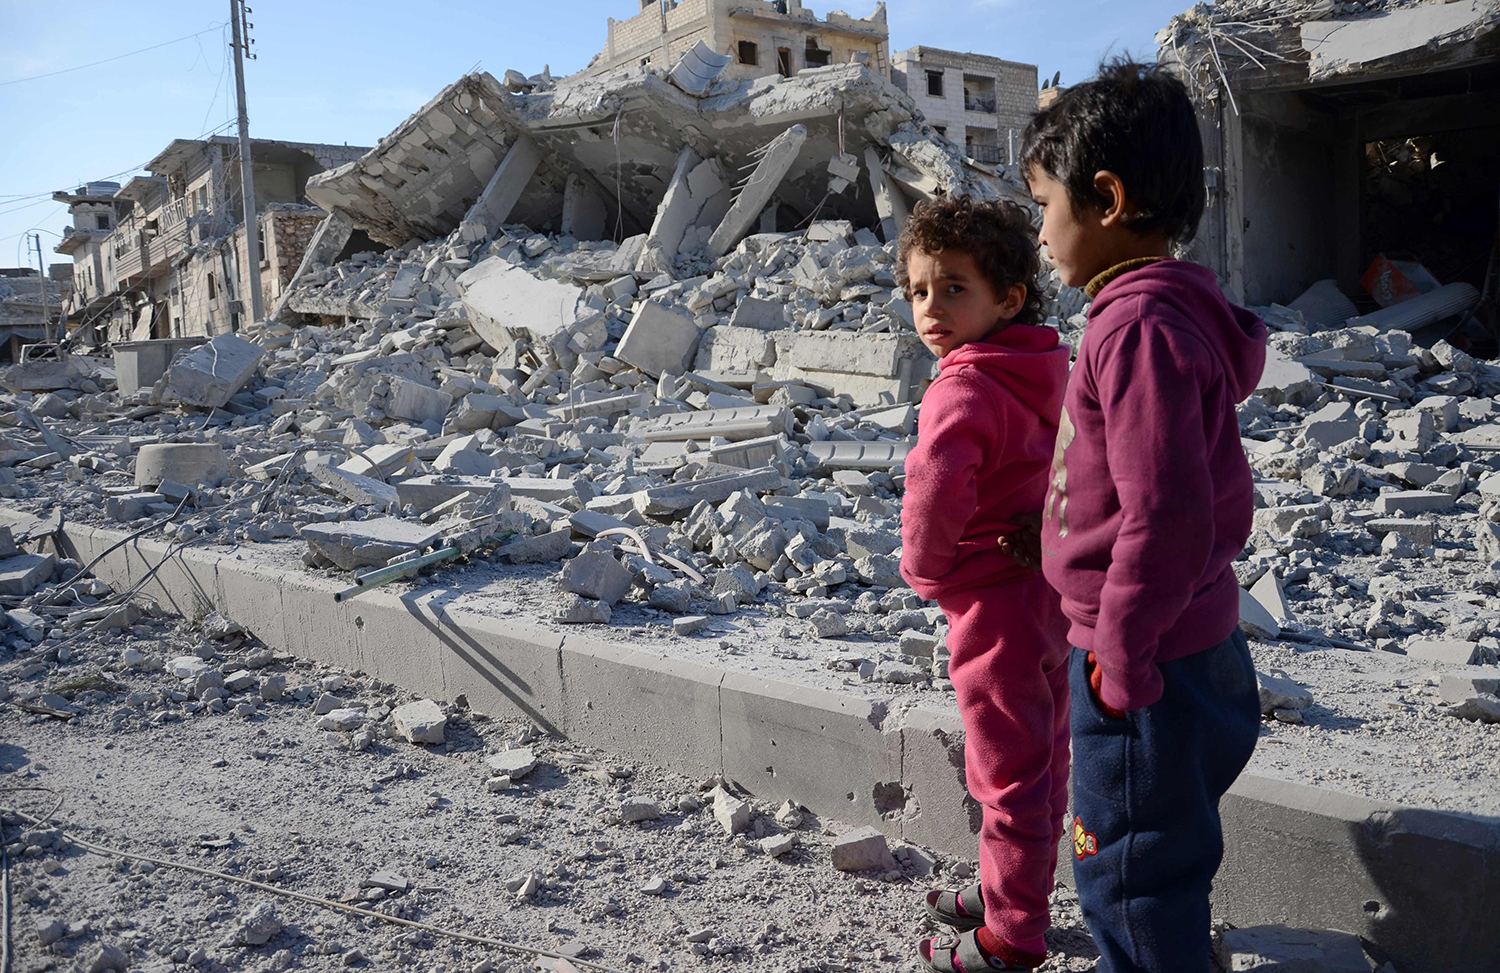 TOPSHOT - Young children stand in a destroyed street in the northwestern border town of al-Bab on February 23, 2017, after Turkish-backed Syrian rebels fully captured the town from the Islamic State (IS) group. Al-Bab, just 25 kilometres (15 miles) south of the Turkish border, was the last IS stronghold in the northern Syrian province of Aleppo. / AFP PHOTO / Nazeer al-Khatib / TT / kod 444